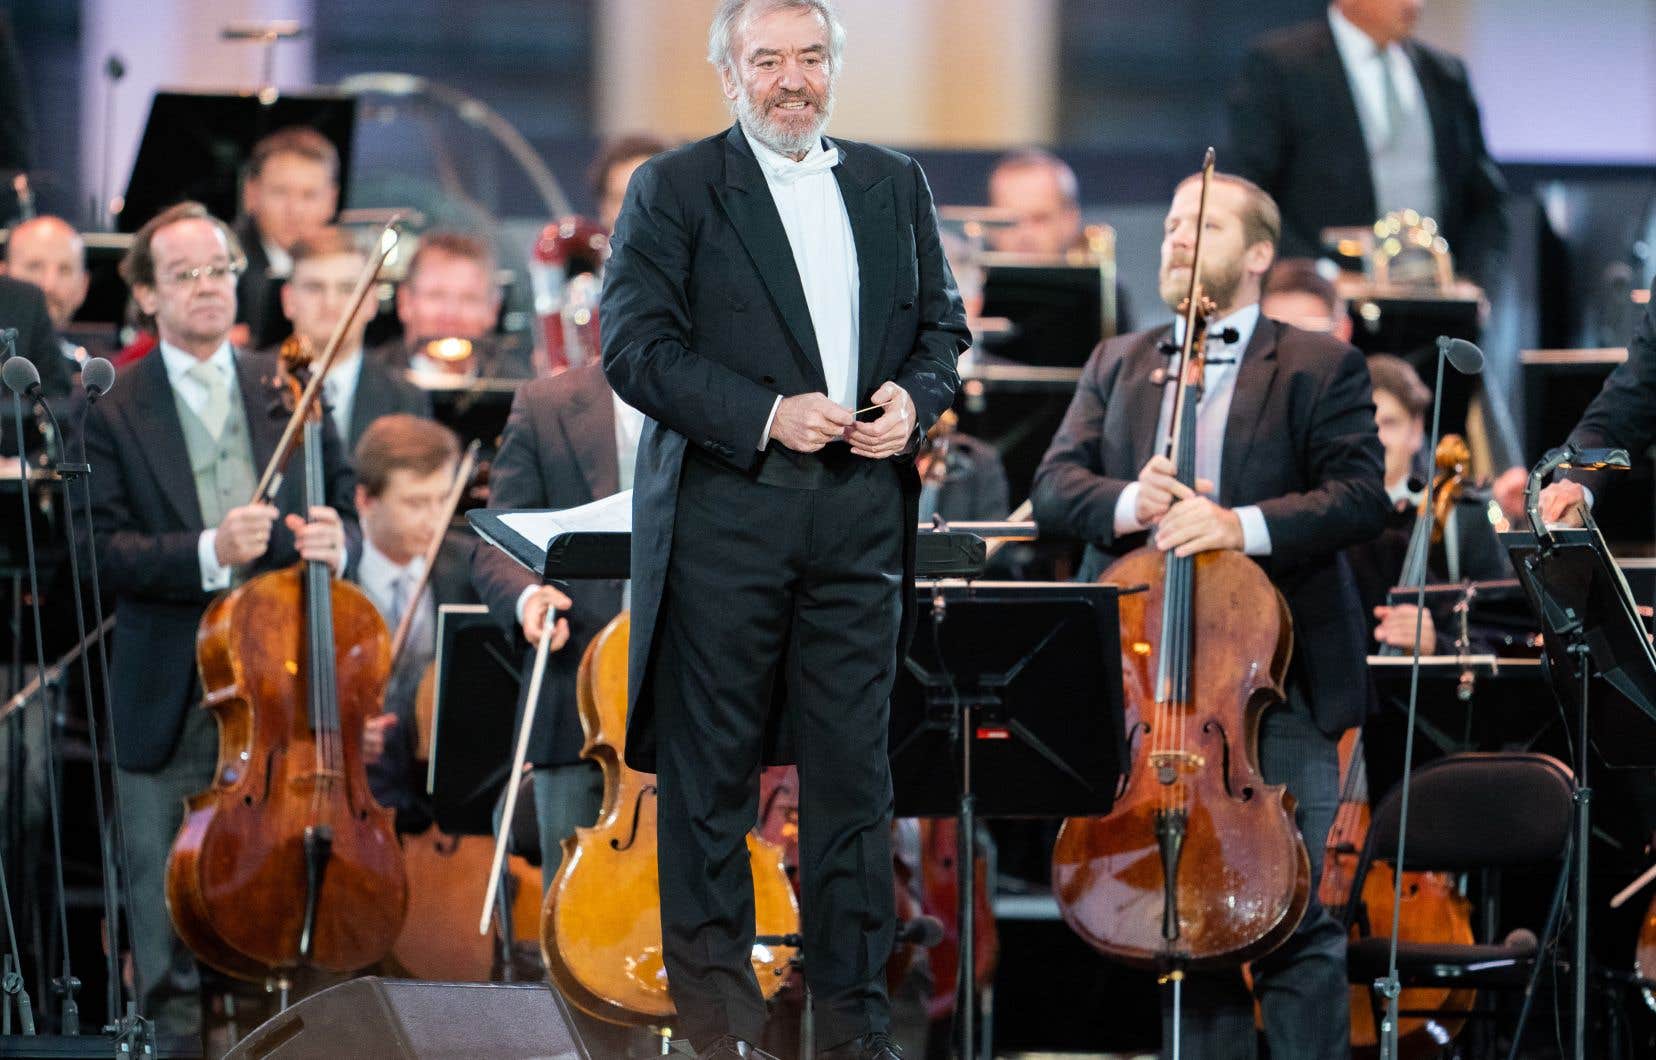 Valerie Gergiev was thrown out by her talented agent